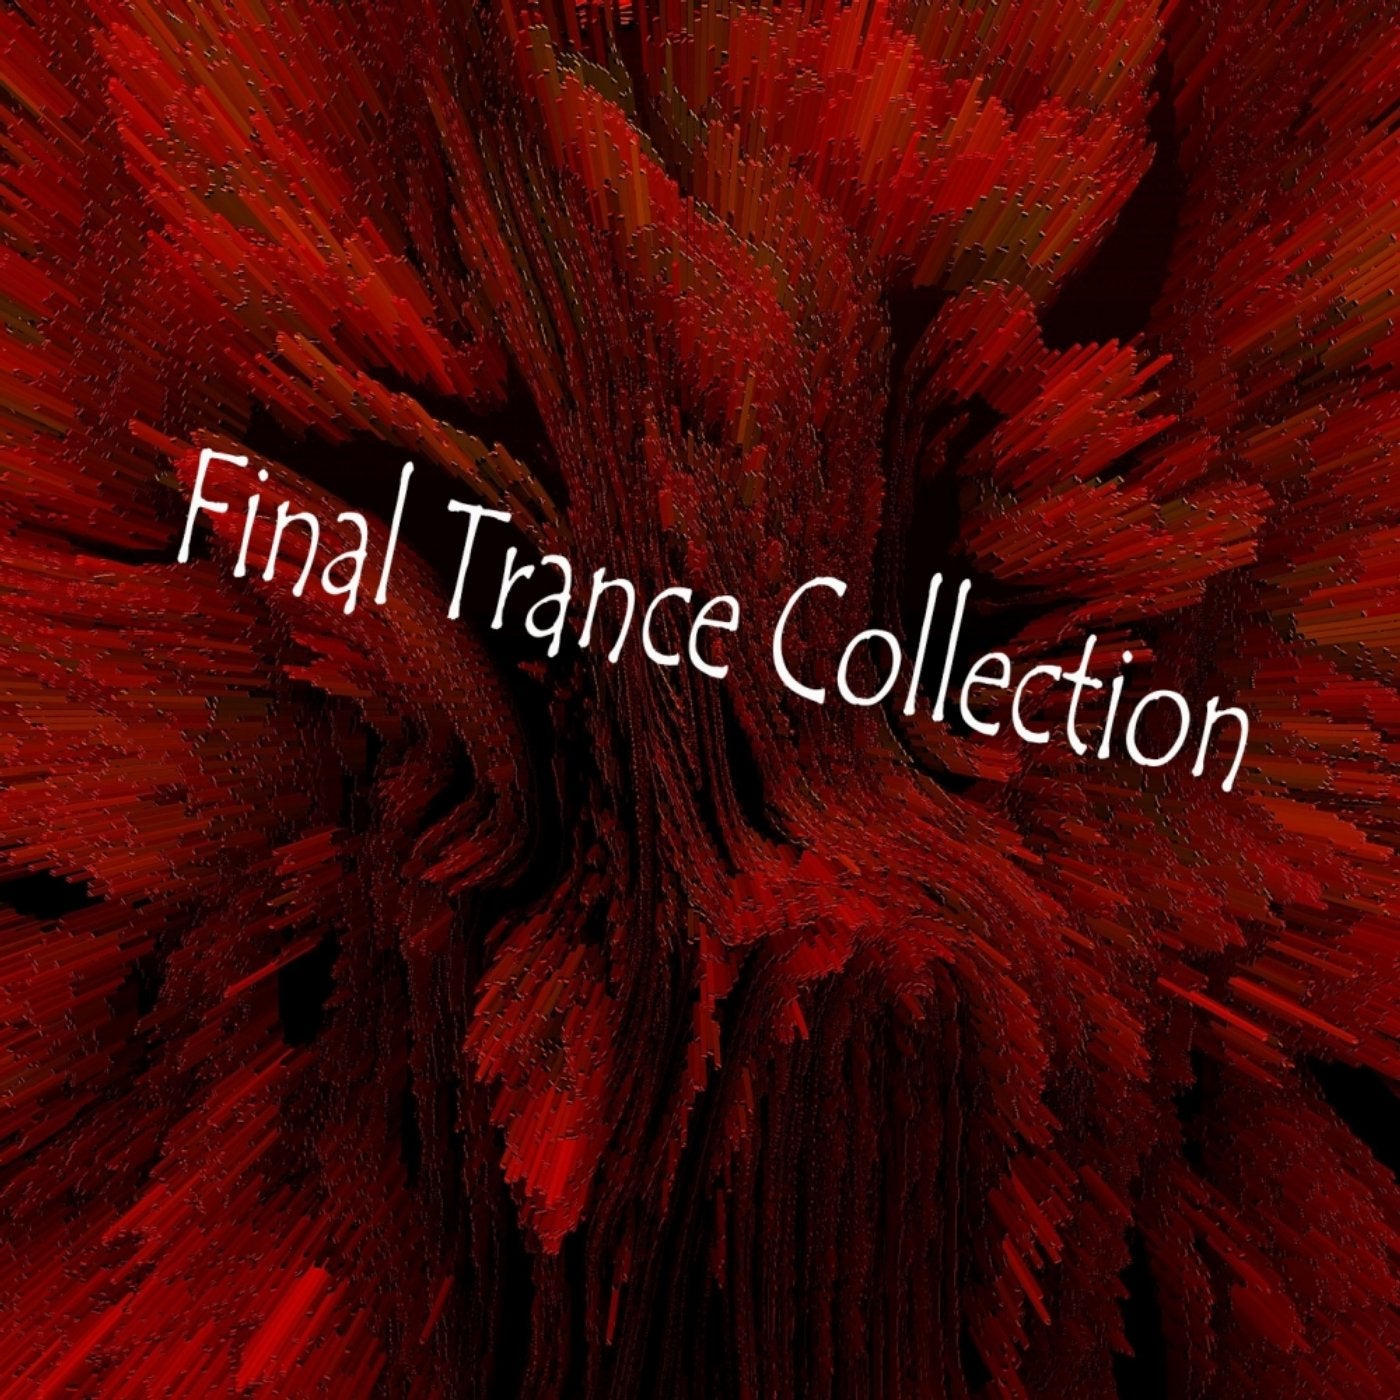 Final Trance Collection